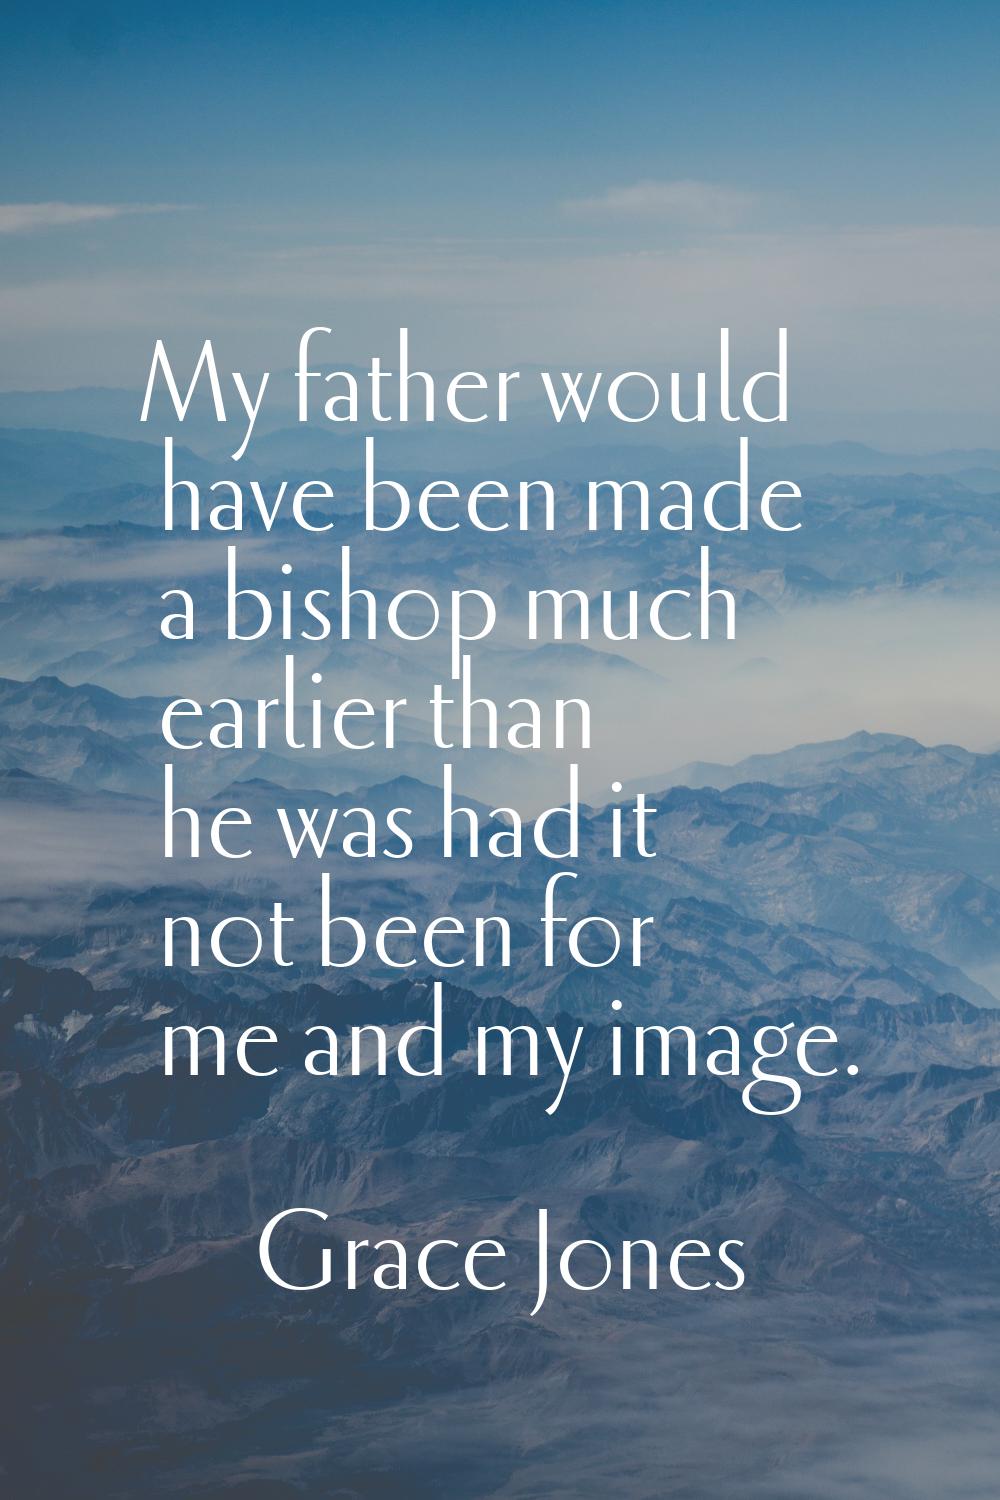 My father would have been made a bishop much earlier than he was had it not been for me and my imag